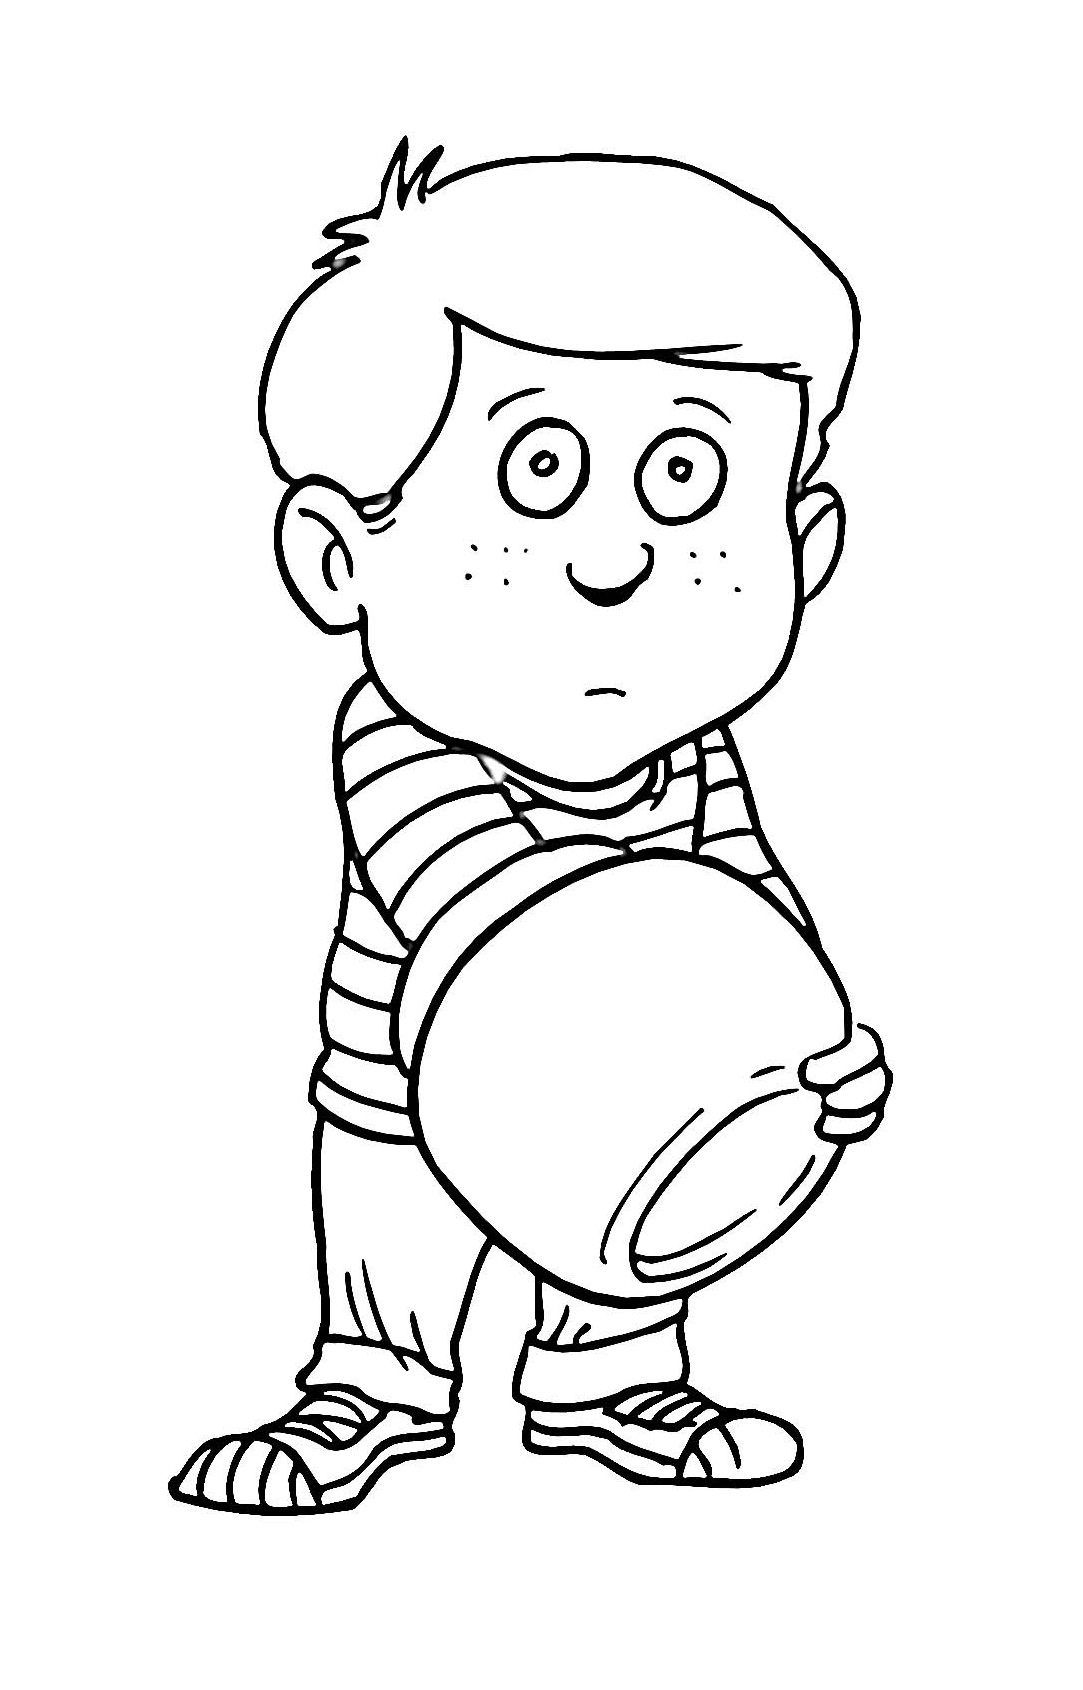 free-printable-goofy-coloring-pages-for-kids-craftsactvities-and